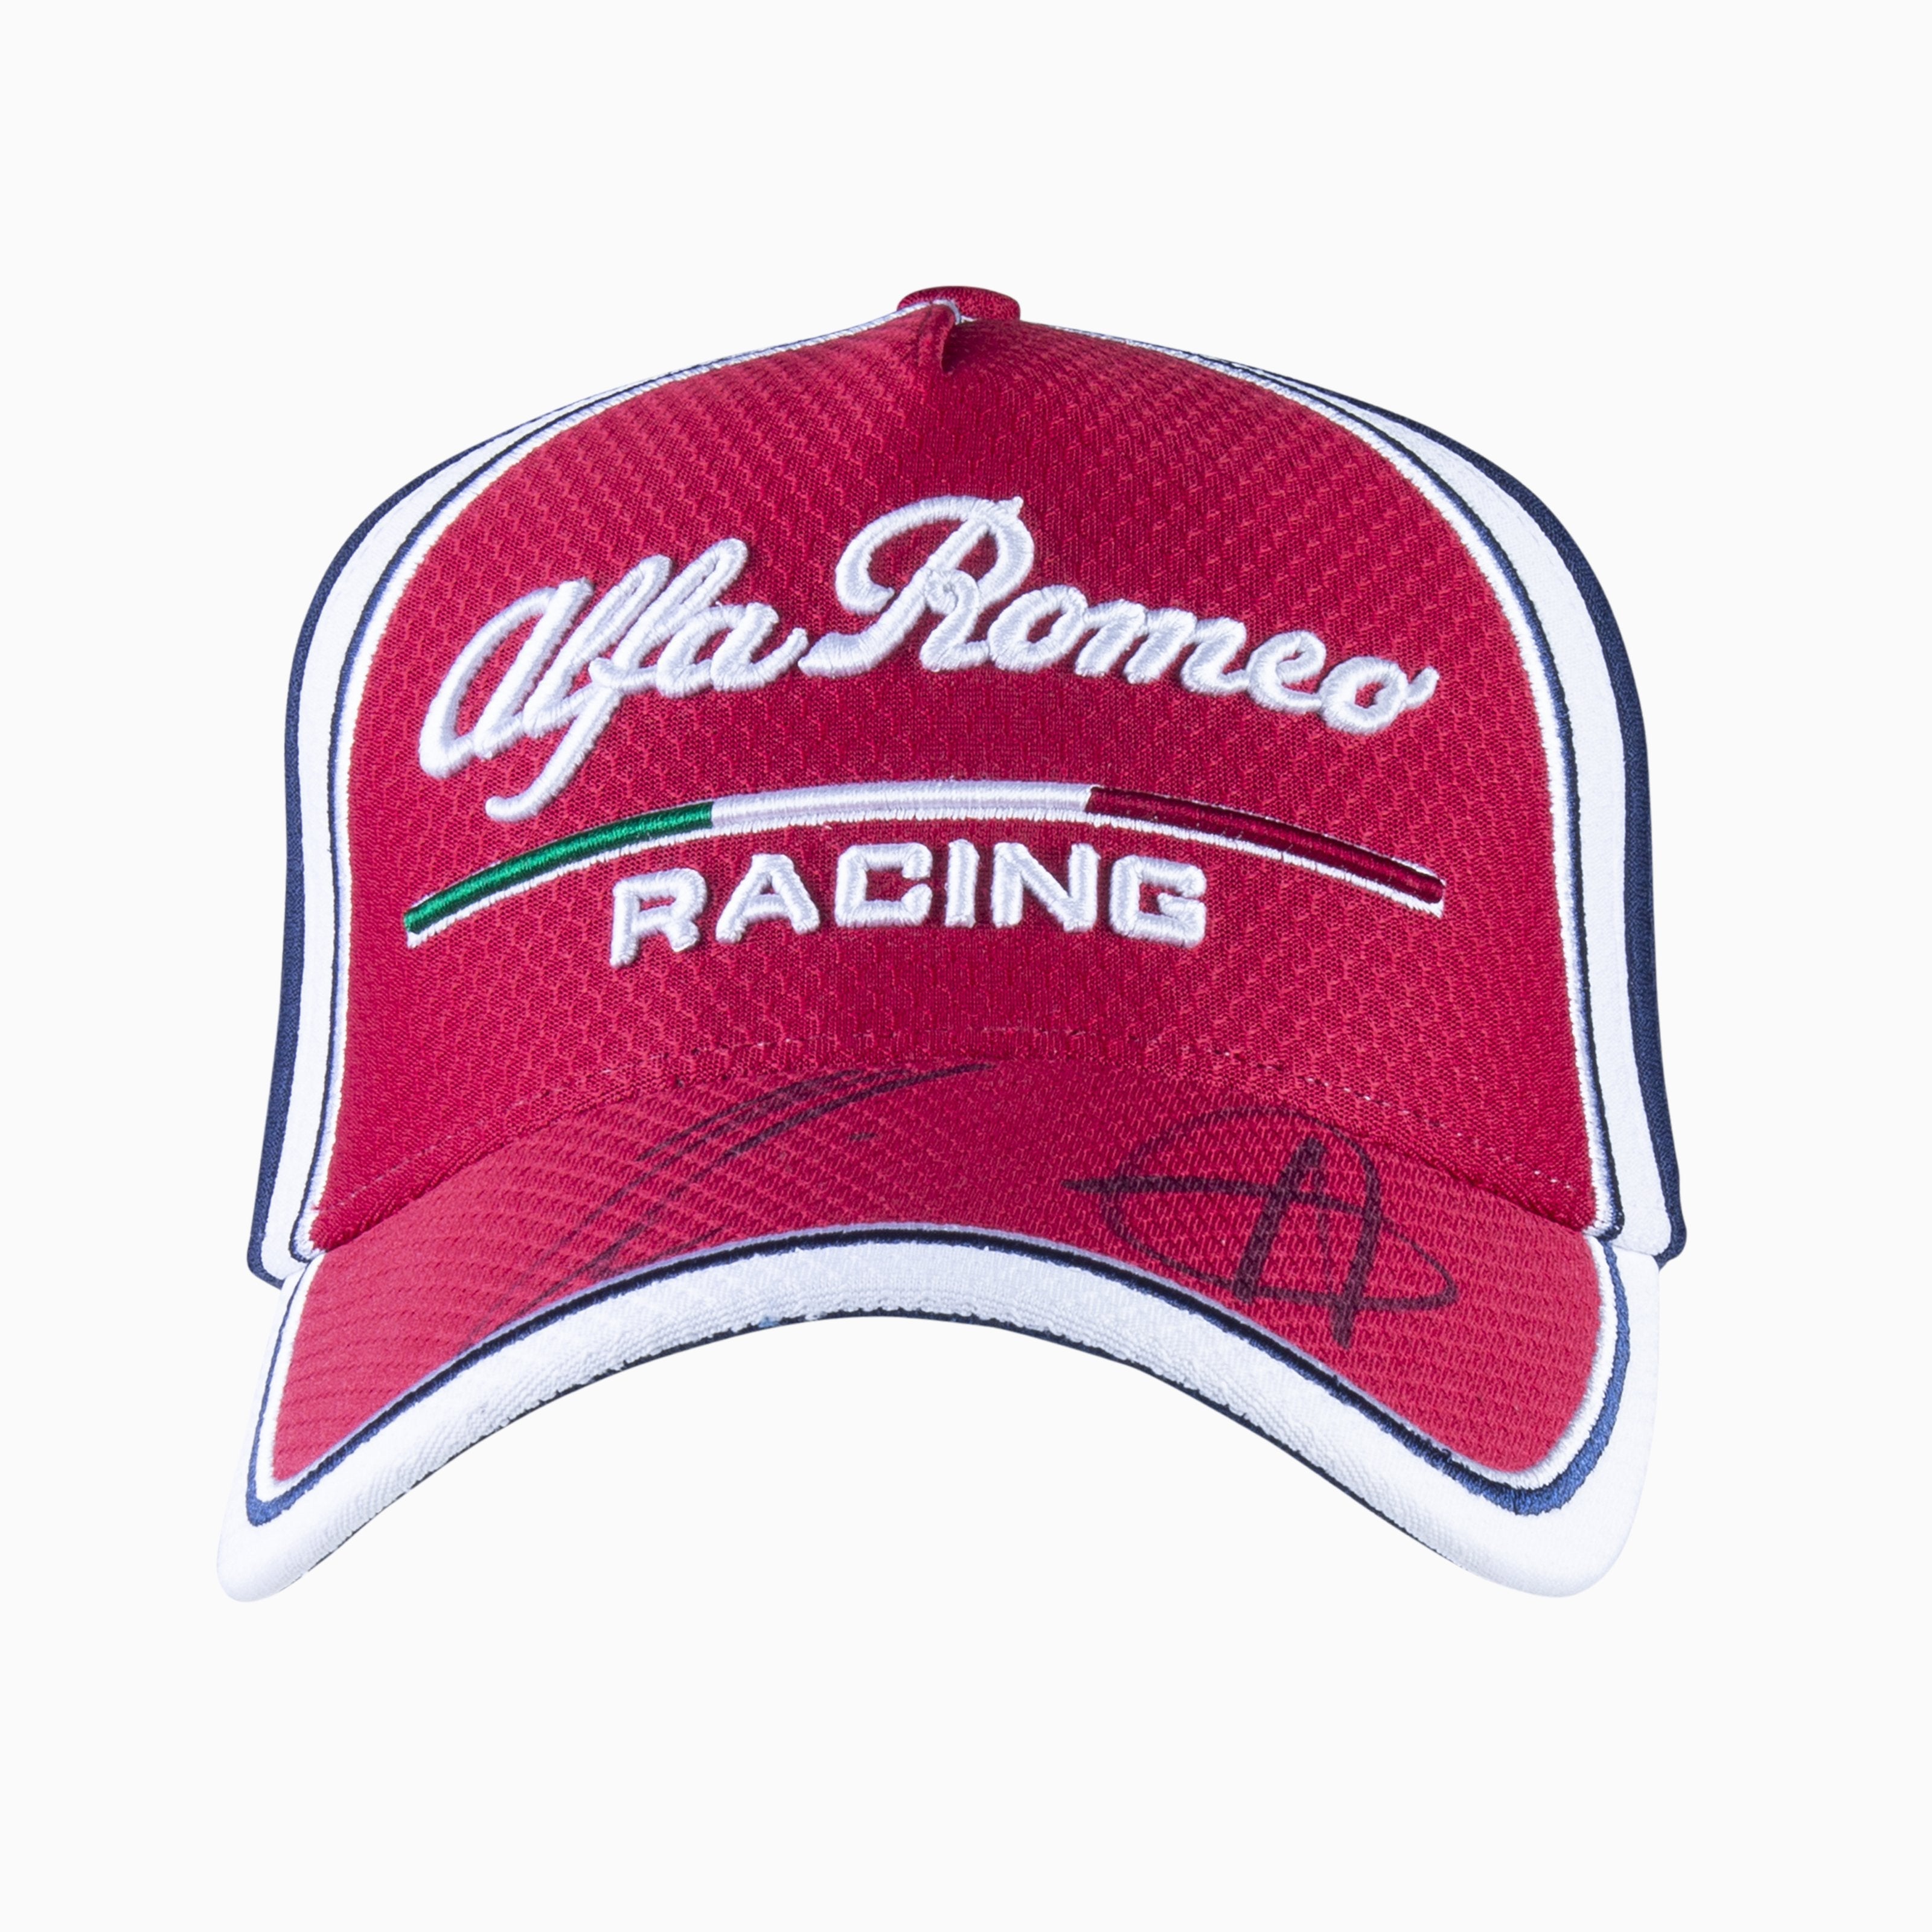 Alfa Romeo Racing Cap - Signed by Räikkönen and Giovinazzi-Apparel-GPX Store -gpx-store